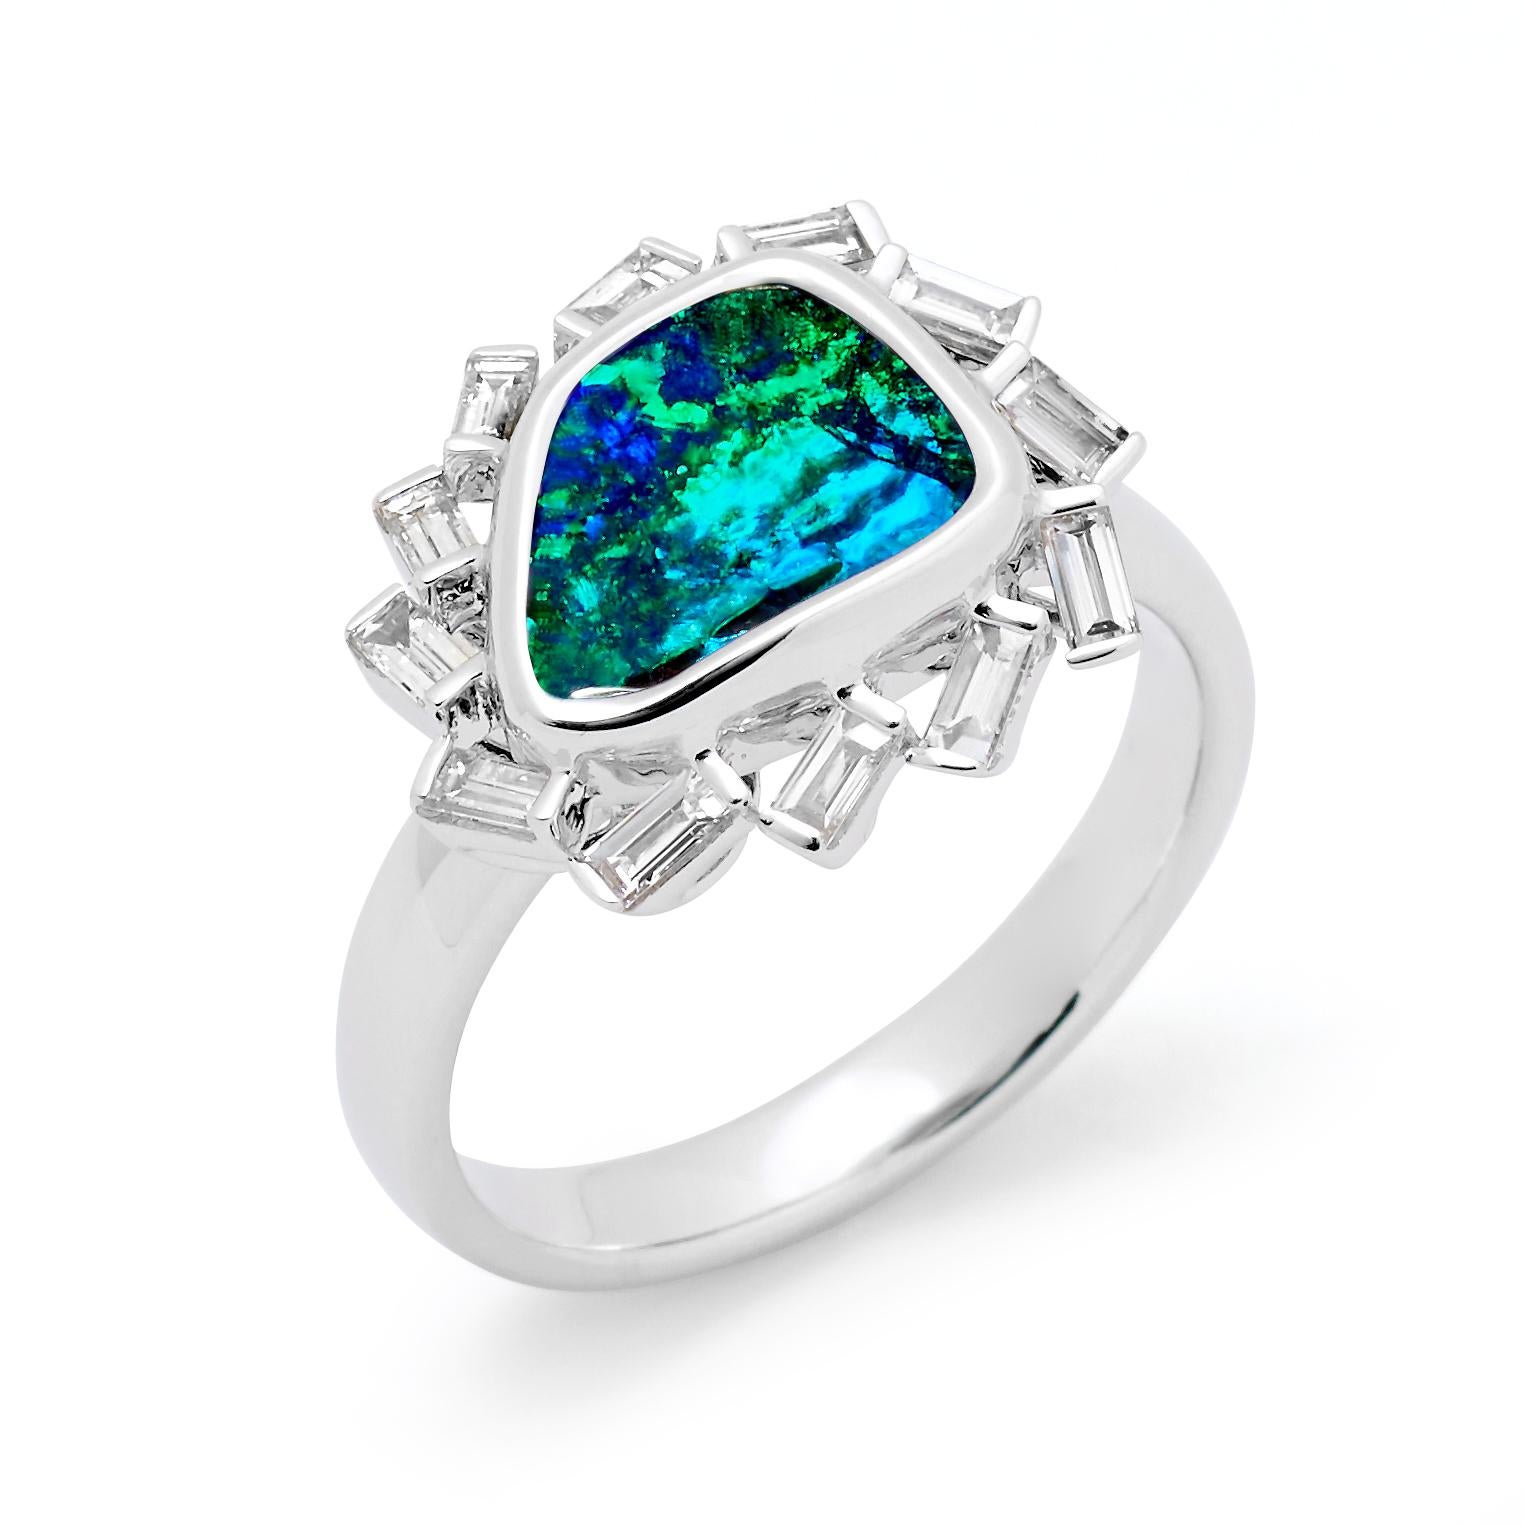 “Bright Star” opal ring was inspired by the beauty of the desert at night. A breathtaking Winton boulder opal (3.10ct) set in pure 18K white gold is circled by a constellation of sparkling diamonds. Vibrant, elegant and as mysterious as the night